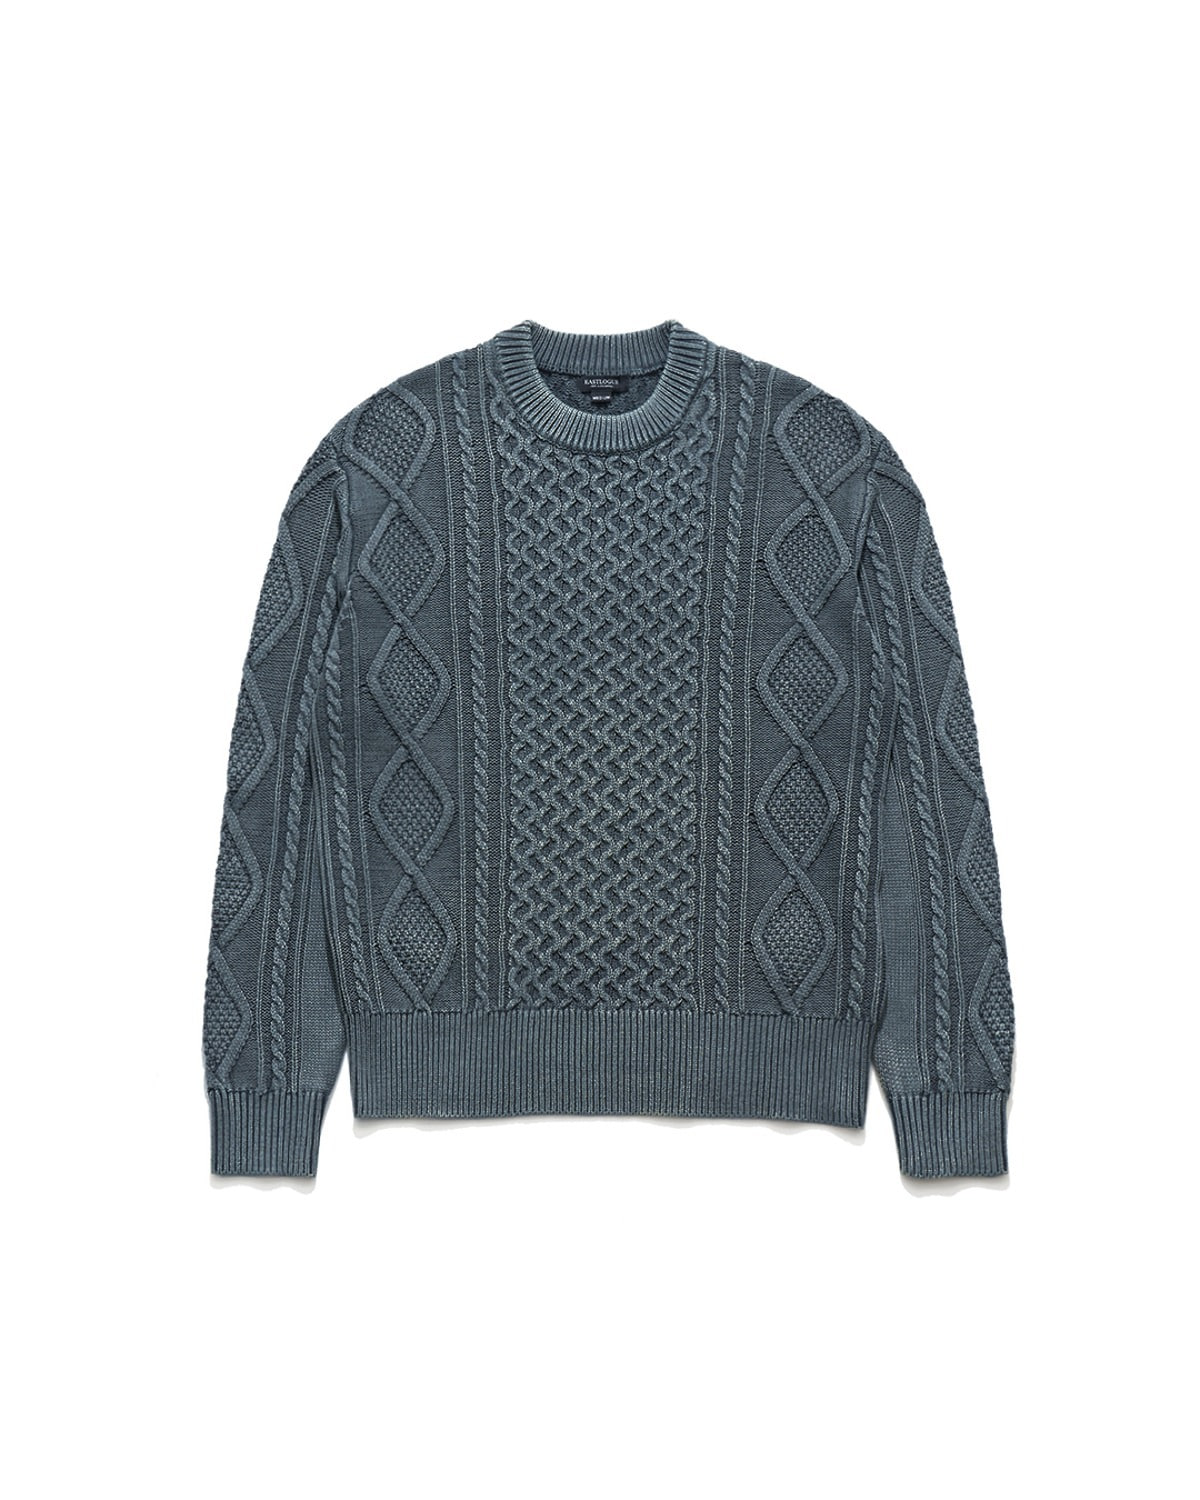 DYED FISHERMAN SWEATER / OLIVE GREY